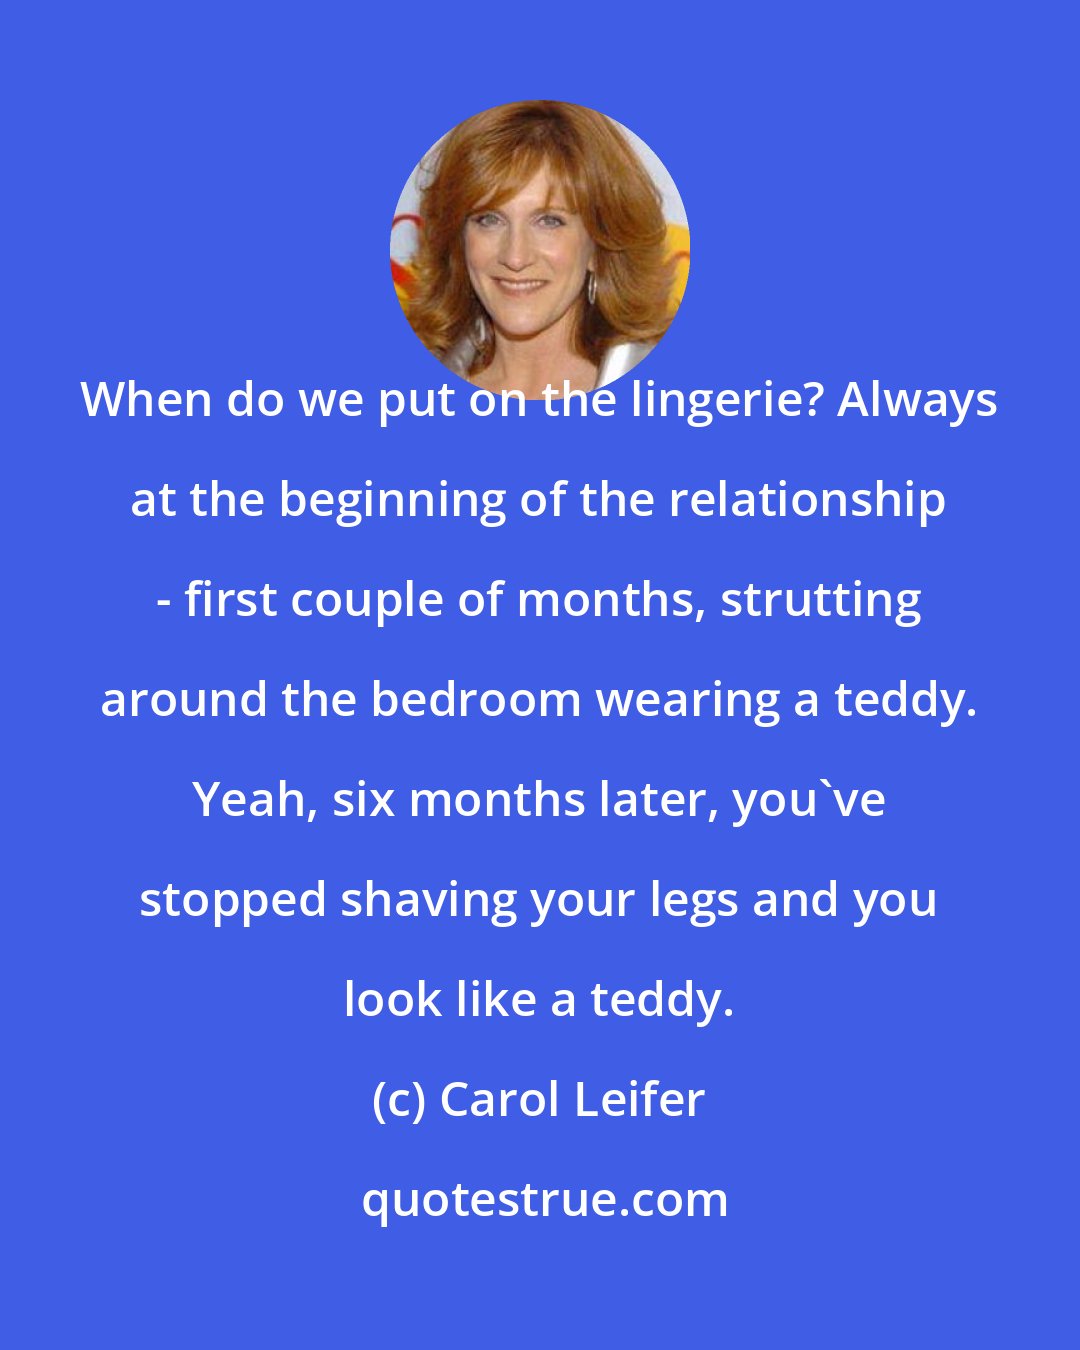 Carol Leifer: When do we put on the lingerie? Always at the beginning of the relationship - first couple of months, strutting around the bedroom wearing a teddy. Yeah, six months later, you've stopped shaving your legs and you look like a teddy.